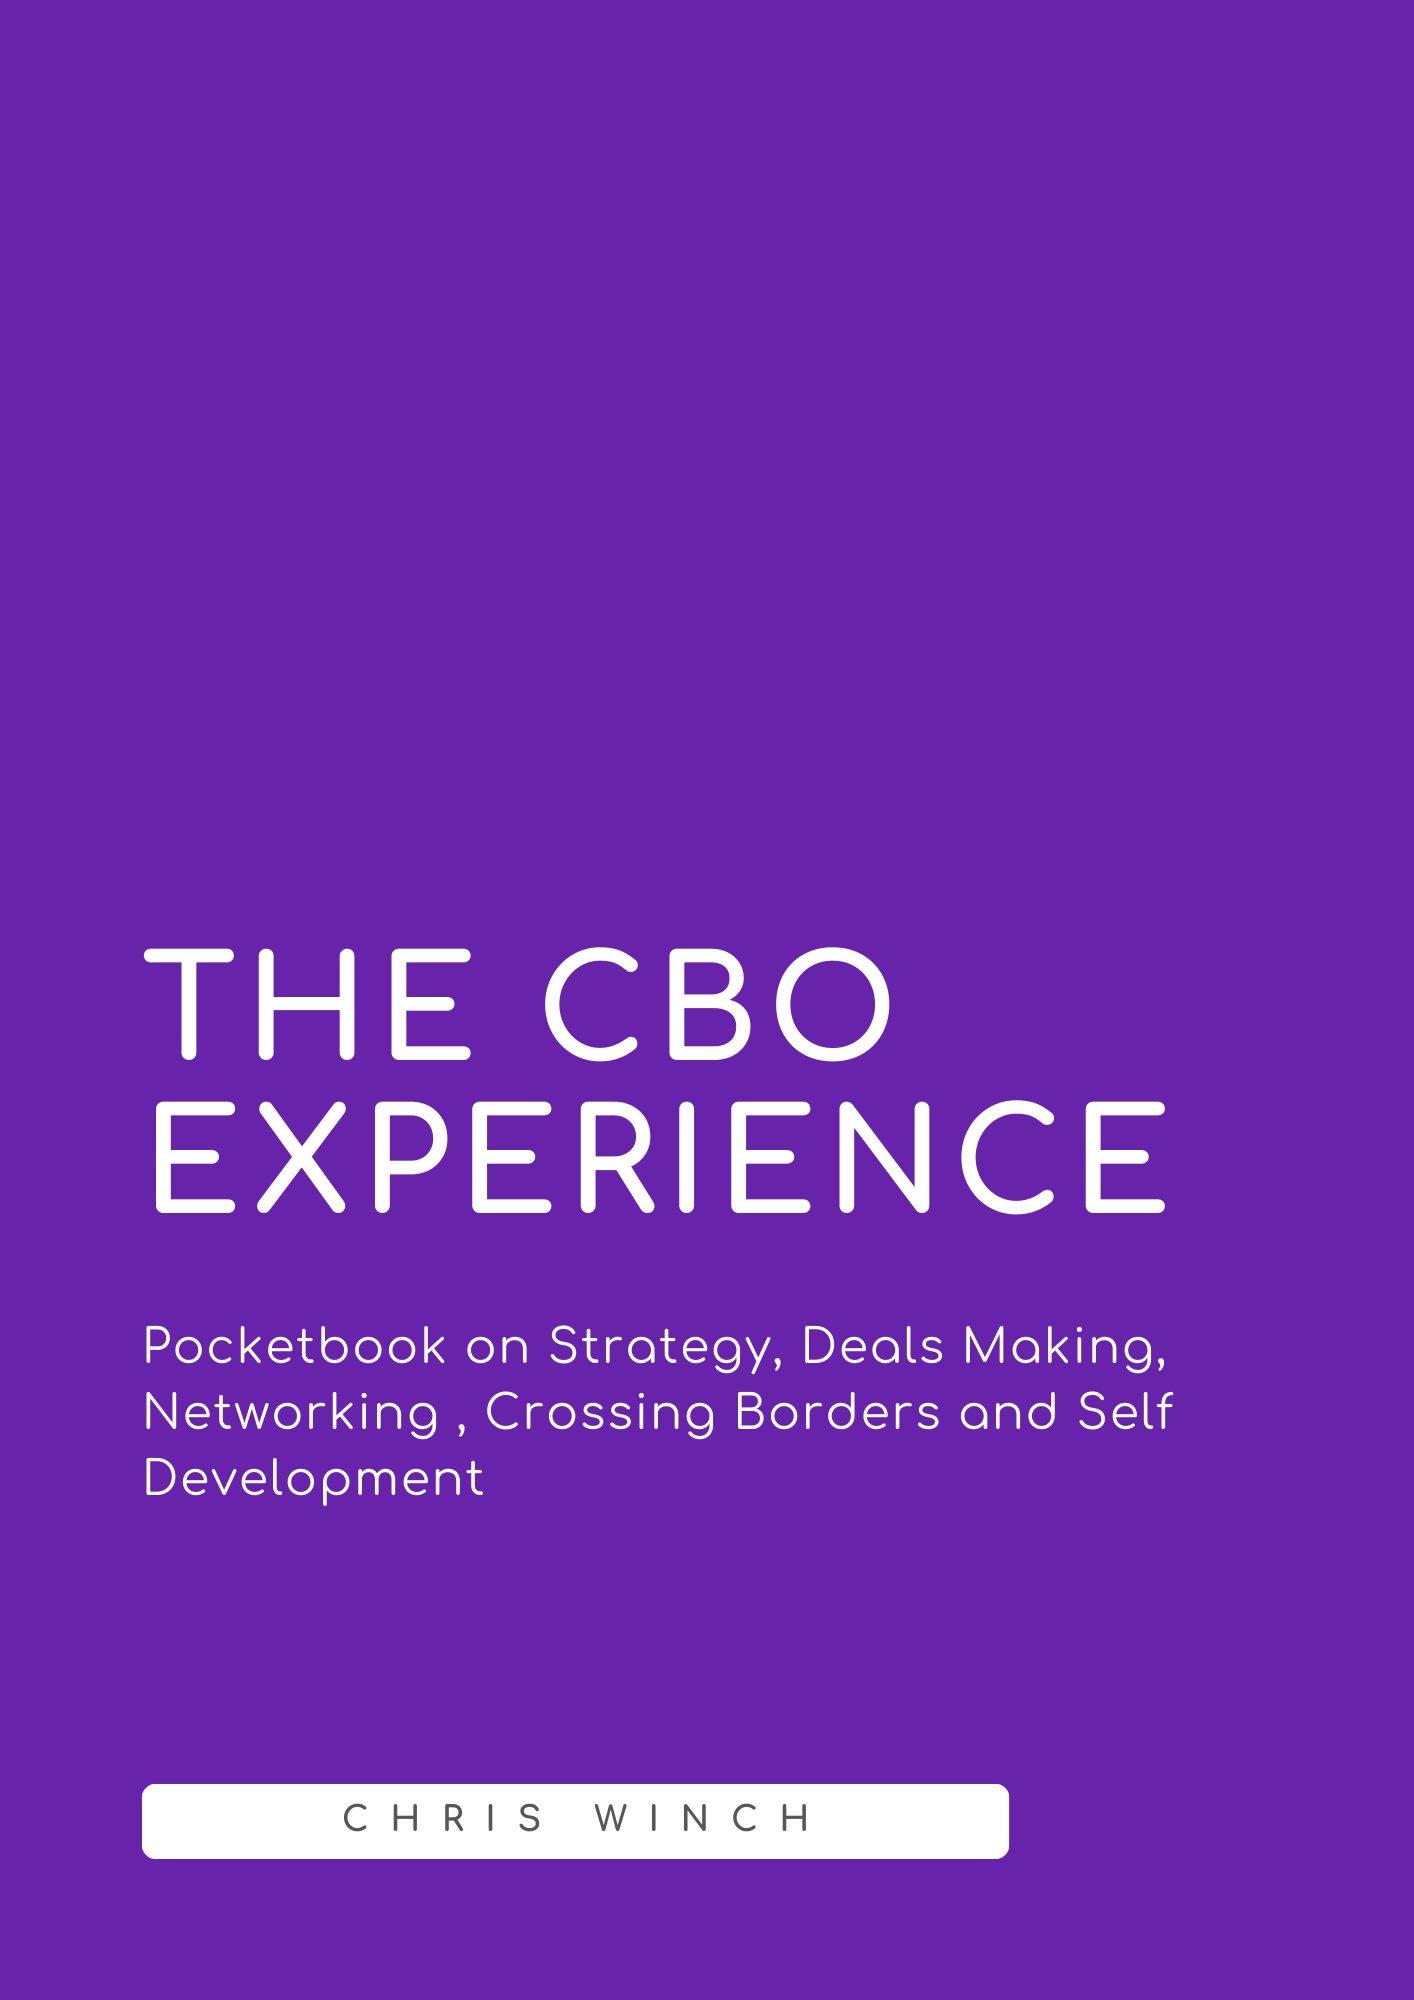 The cover page for the book  The CBO experience 